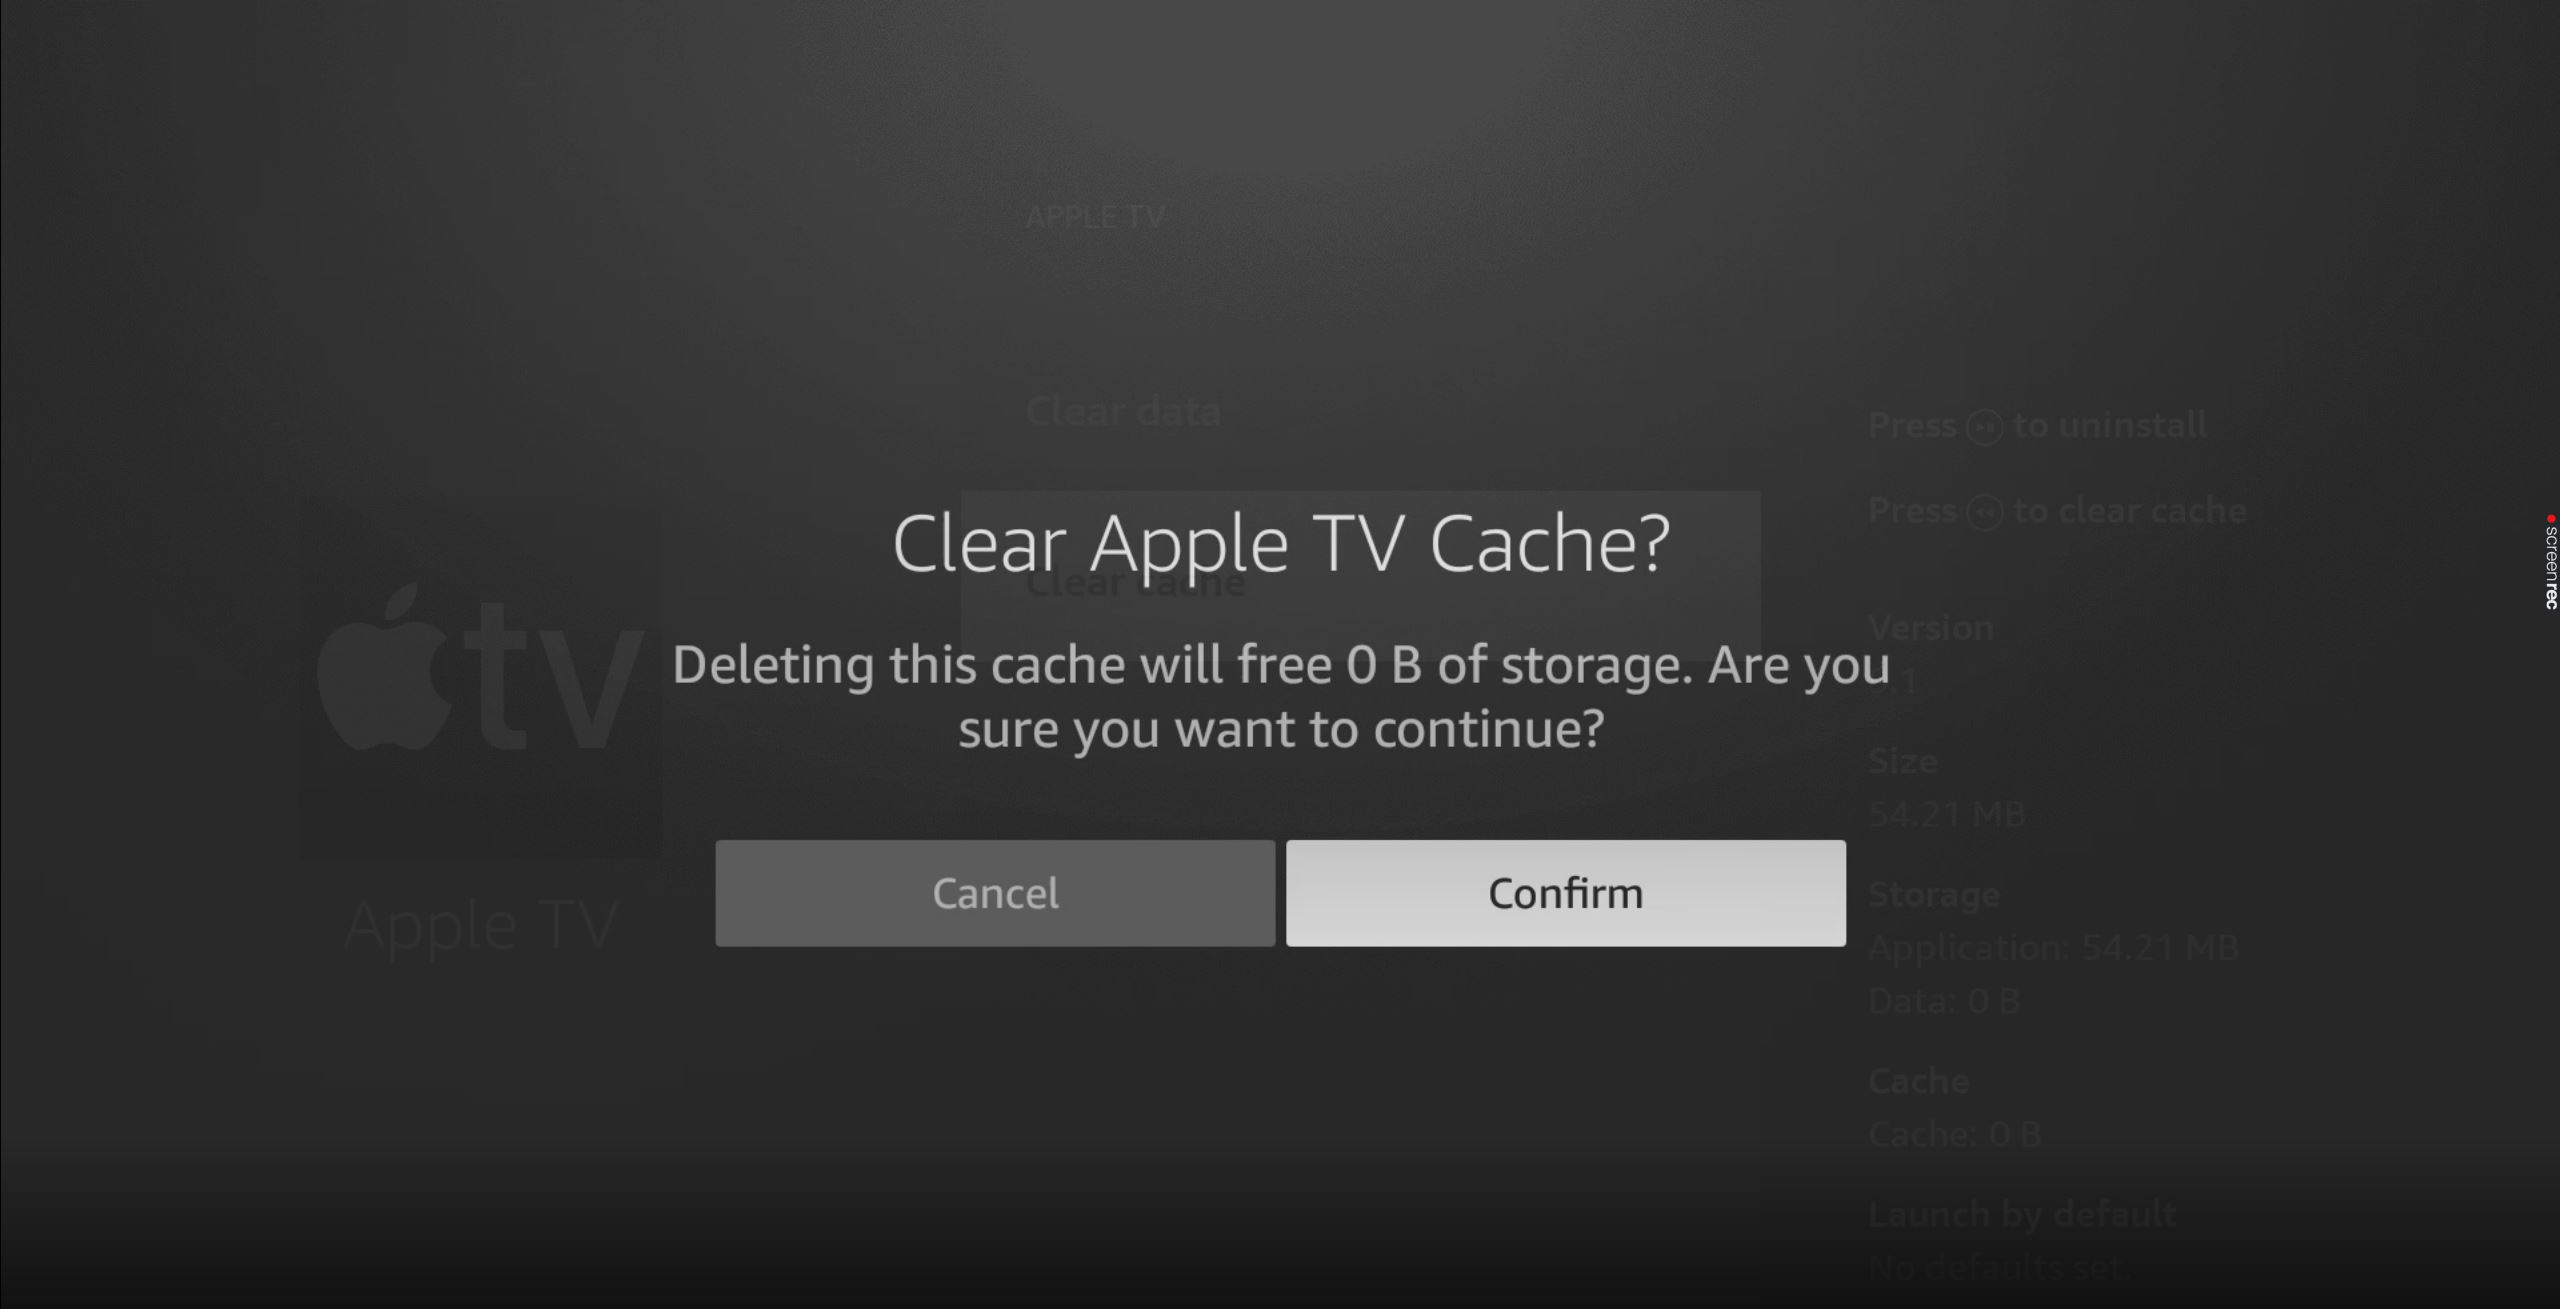 How to confirm clearing Apple TV cache on Amazon Firestick